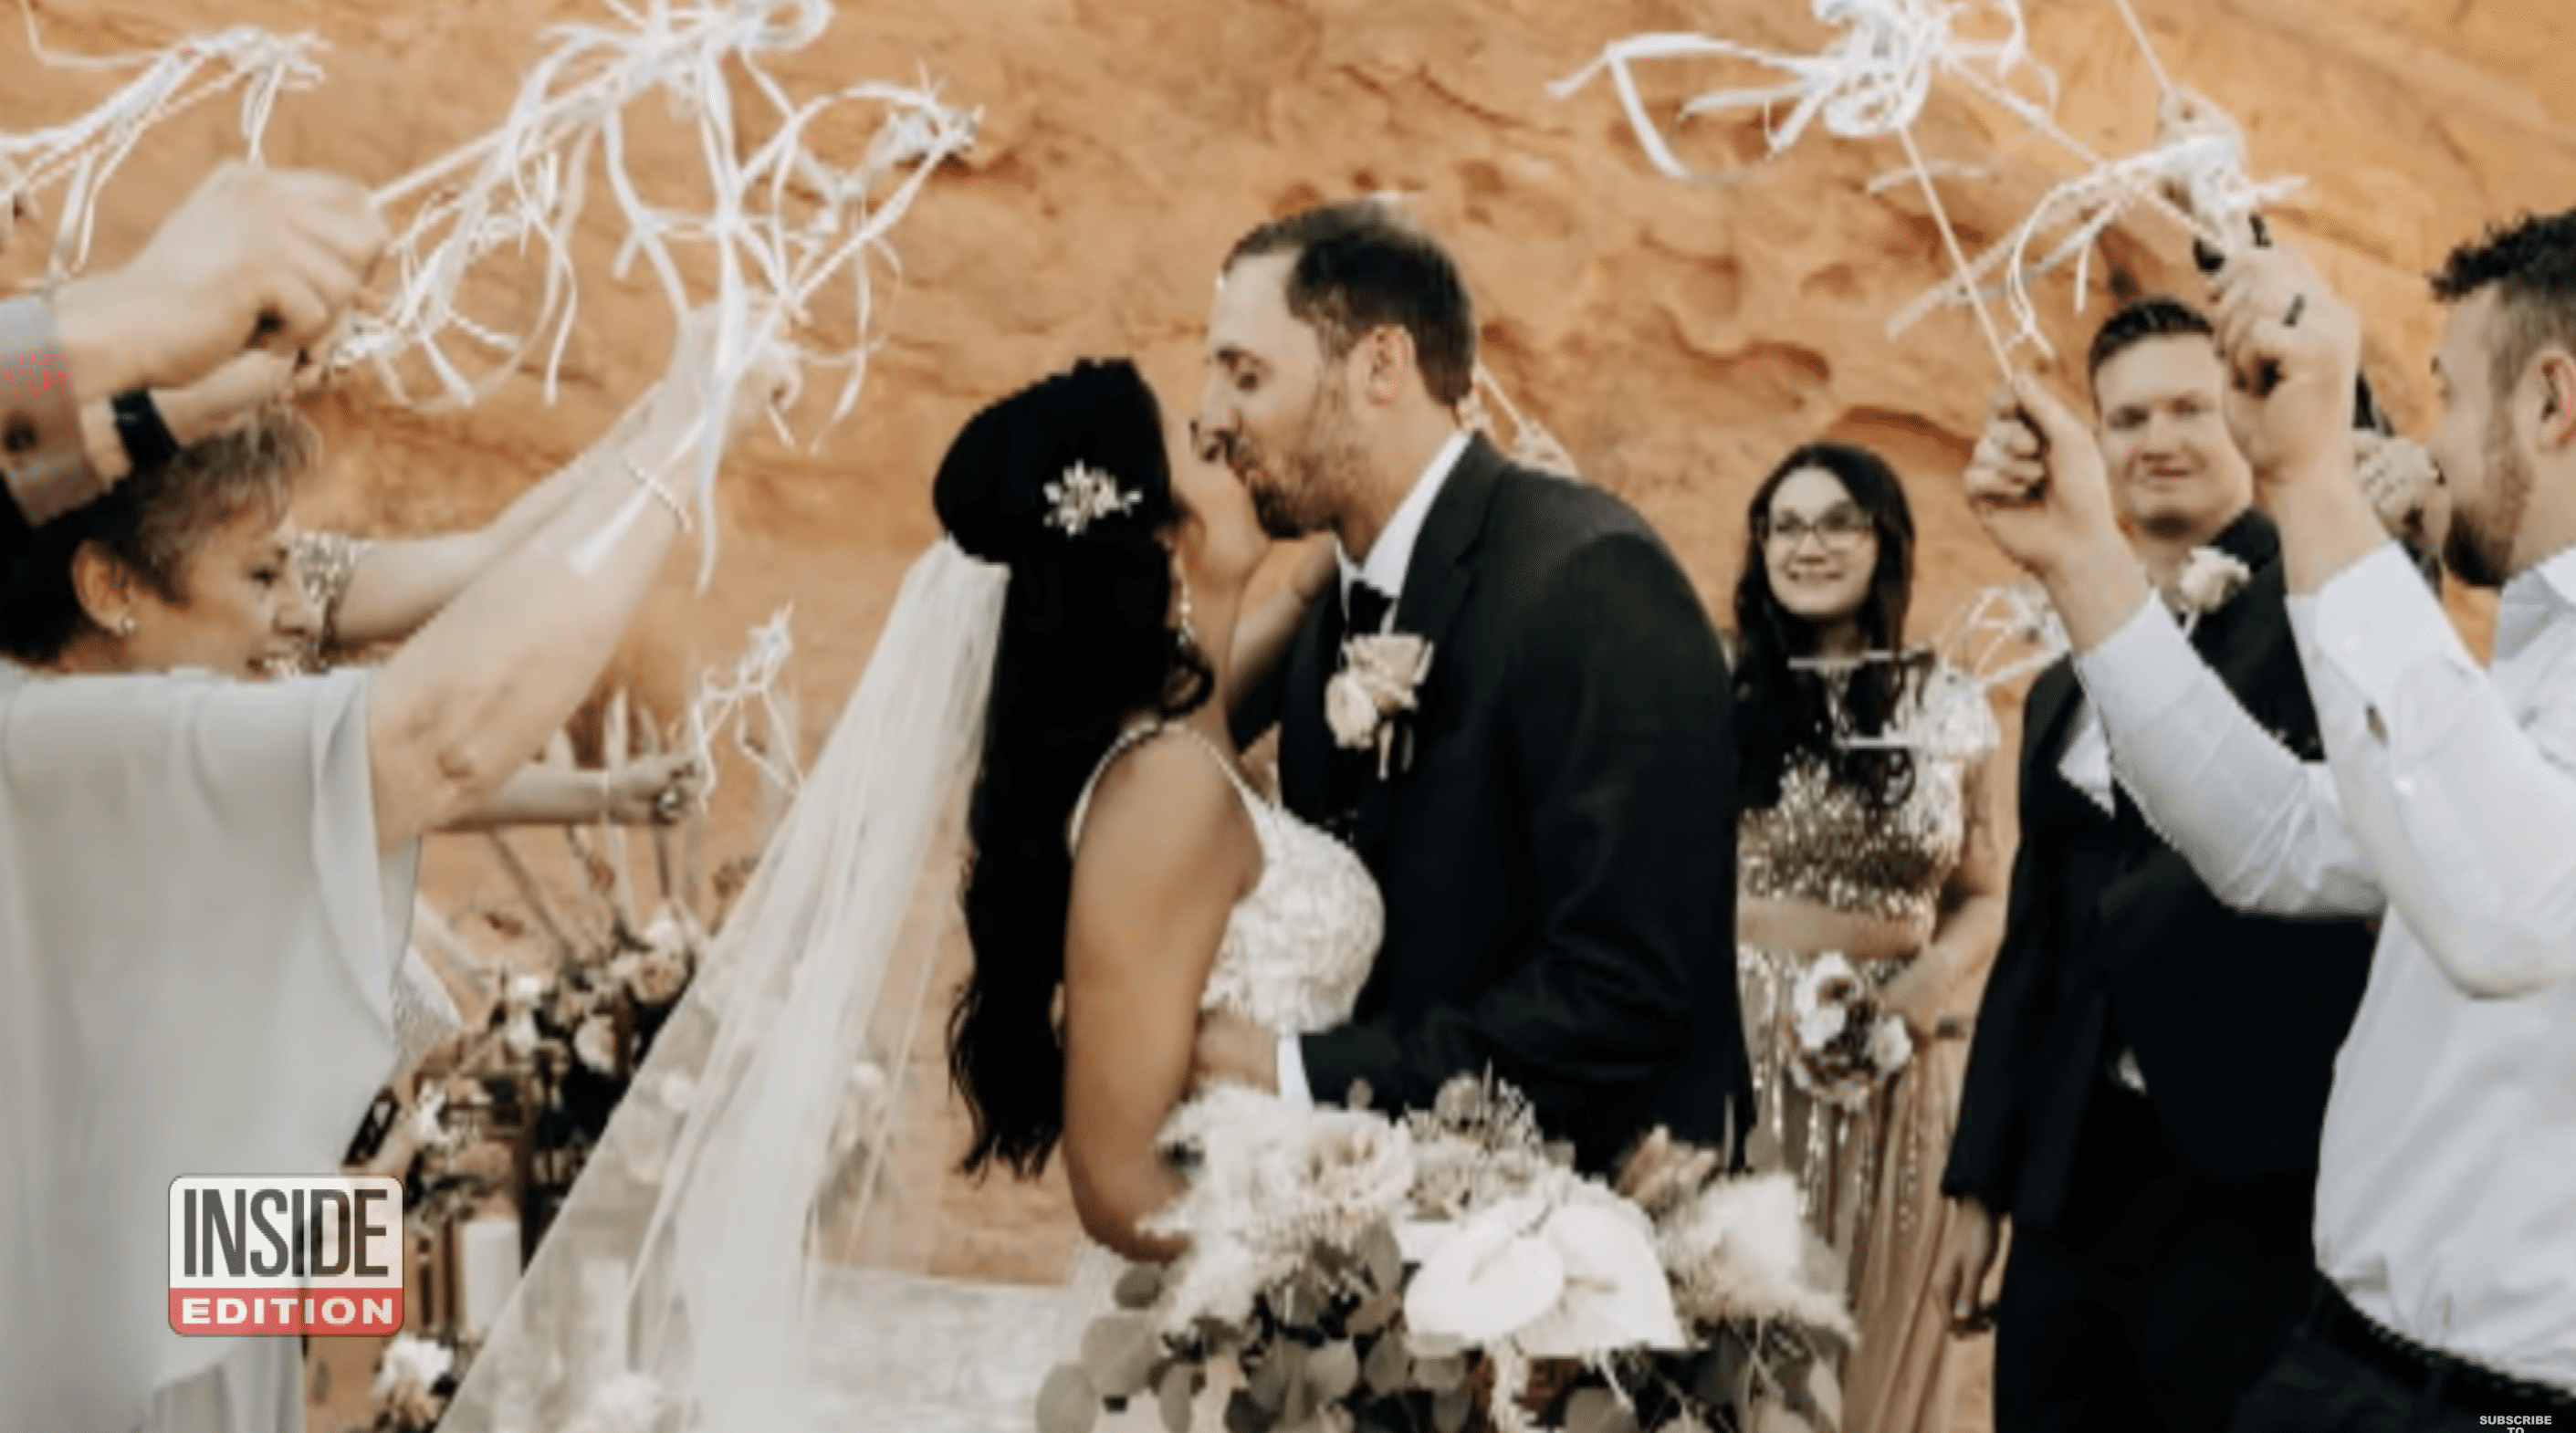 Hlavaty and Romano got married in Las Vegas without the bride's parents. | Photo: YouTube.com/Inside Edition